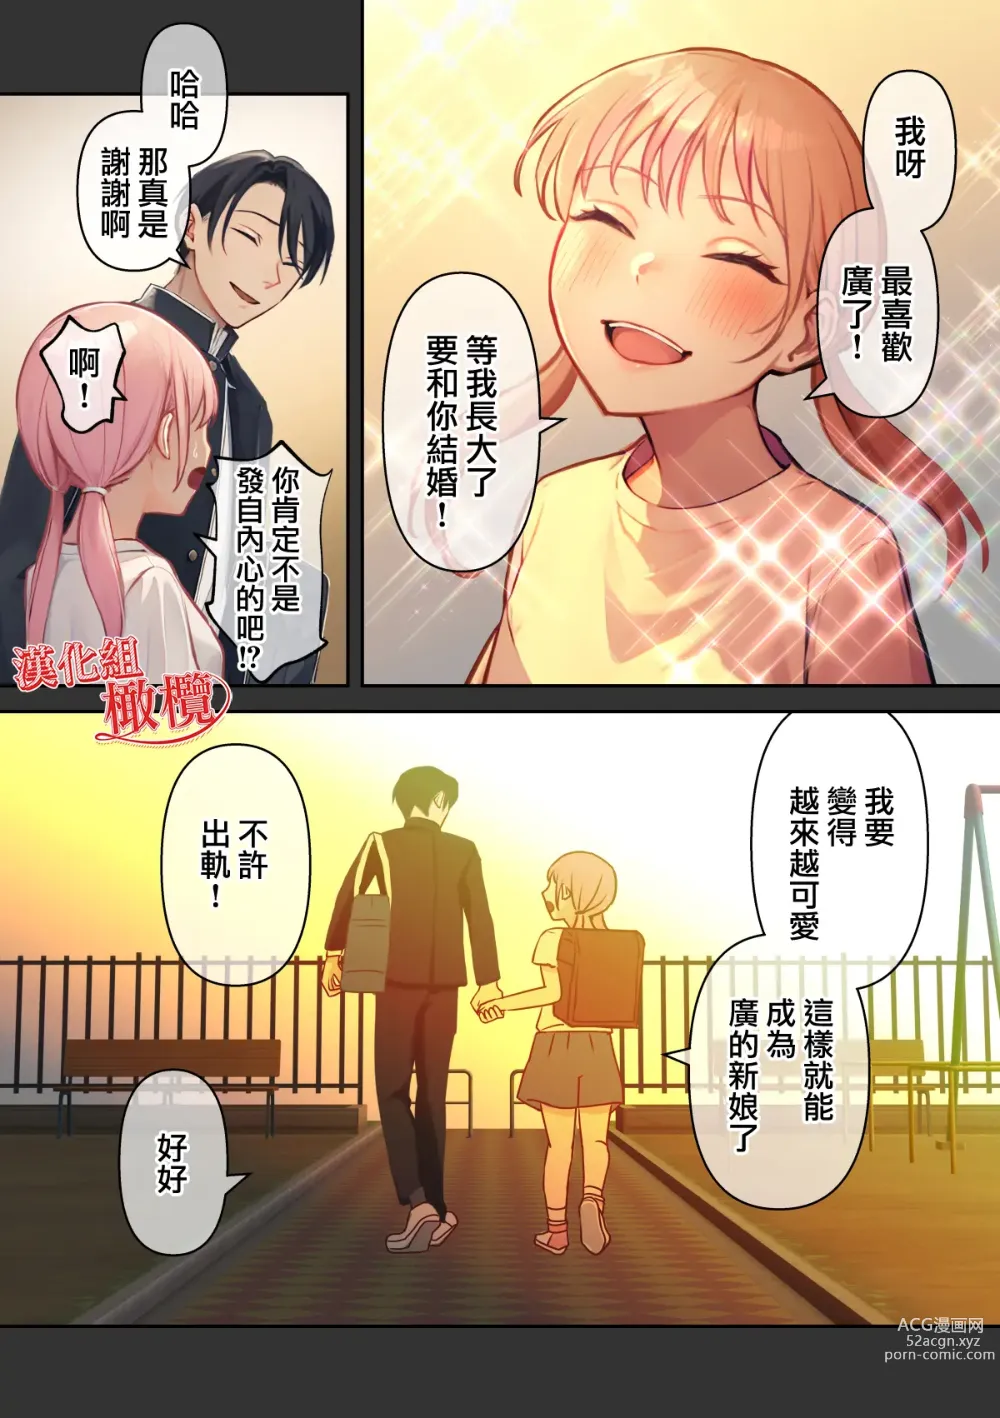 Page 48 of doujinshi 我最棒的扶她女友